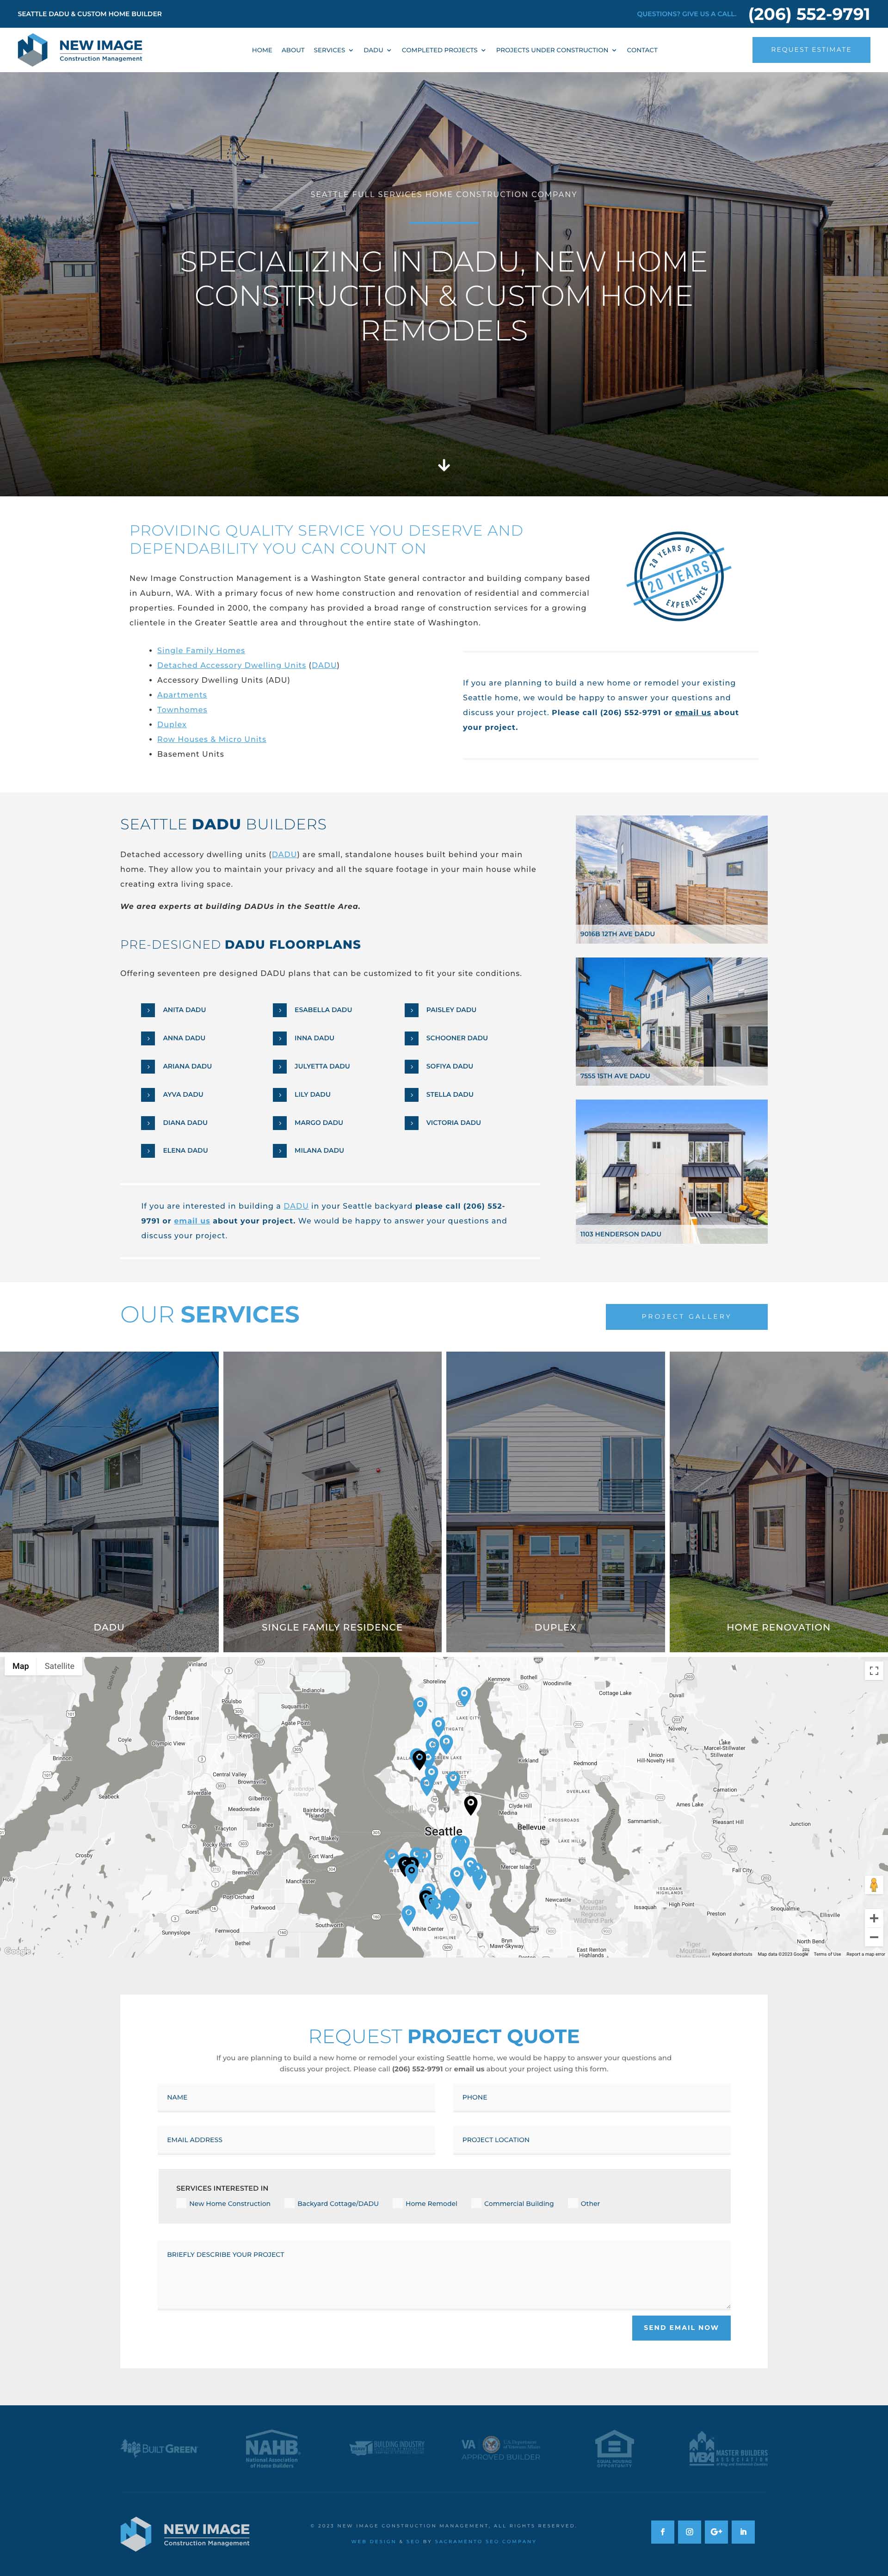 New Image Construction - Home Page